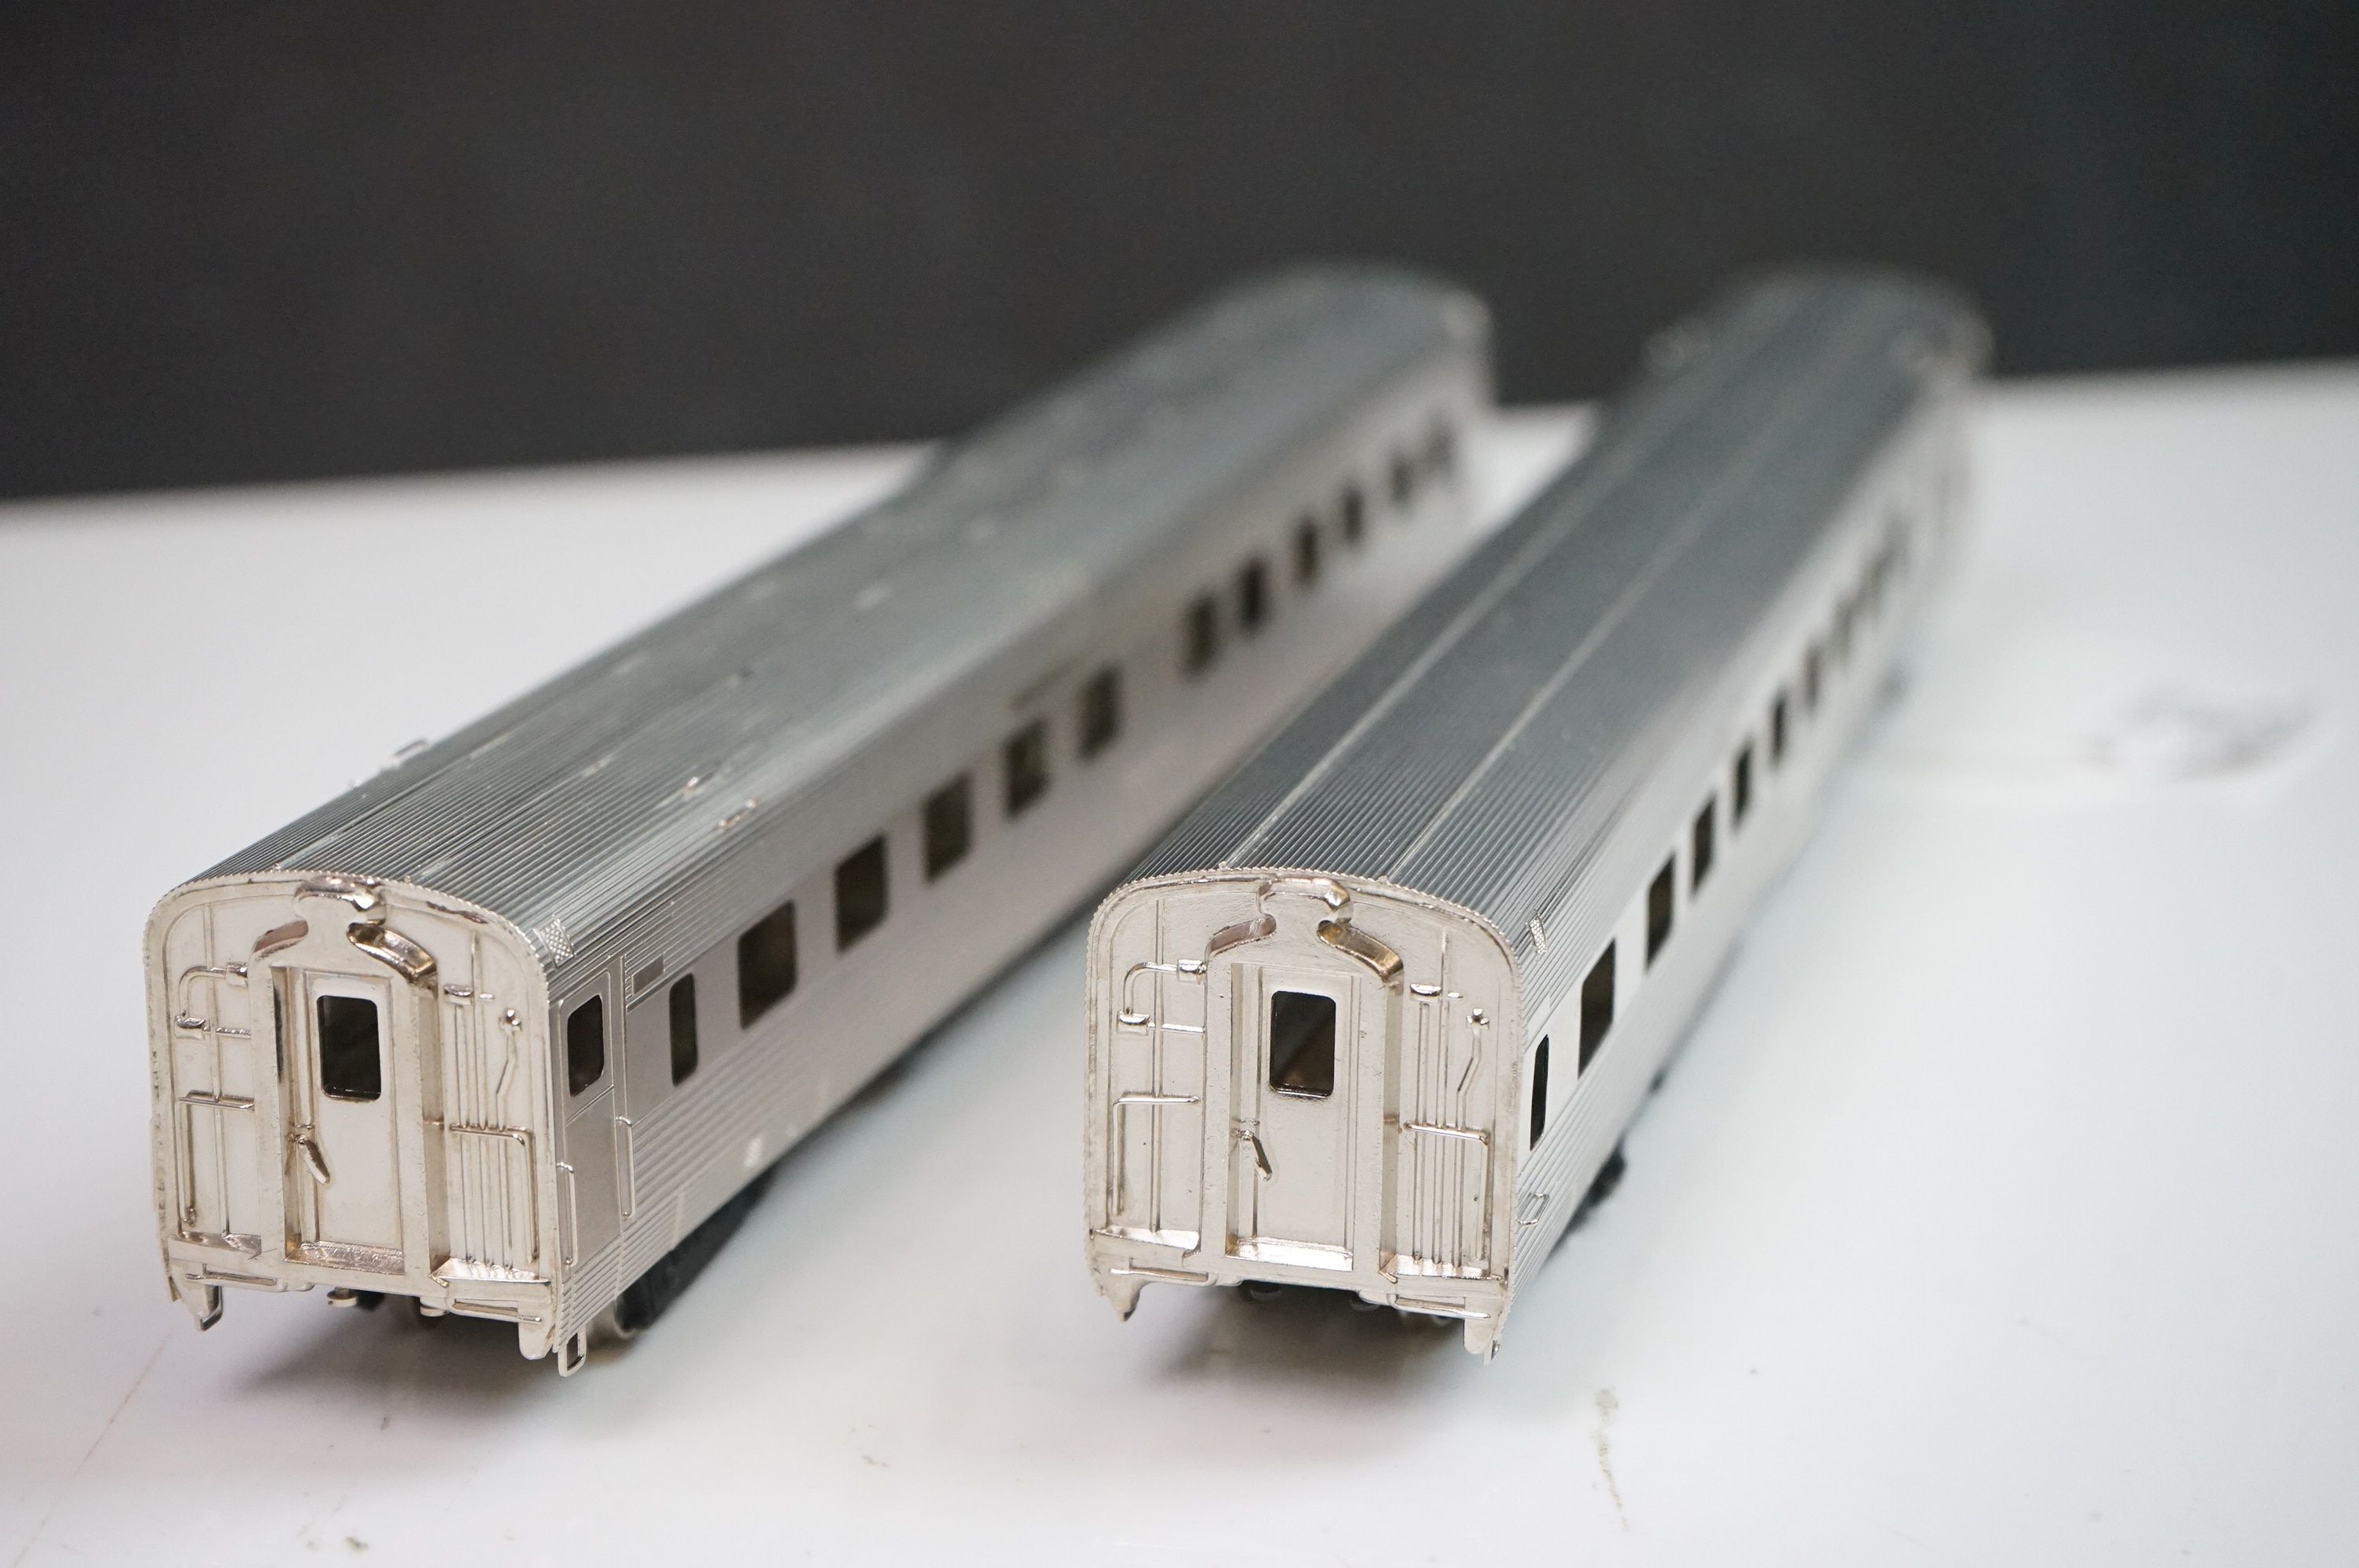 Boxed Nickel Plate HO gauge CZ Pullman Roomette brass rolling stock set made by KMT (Japan), both - Image 3 of 10